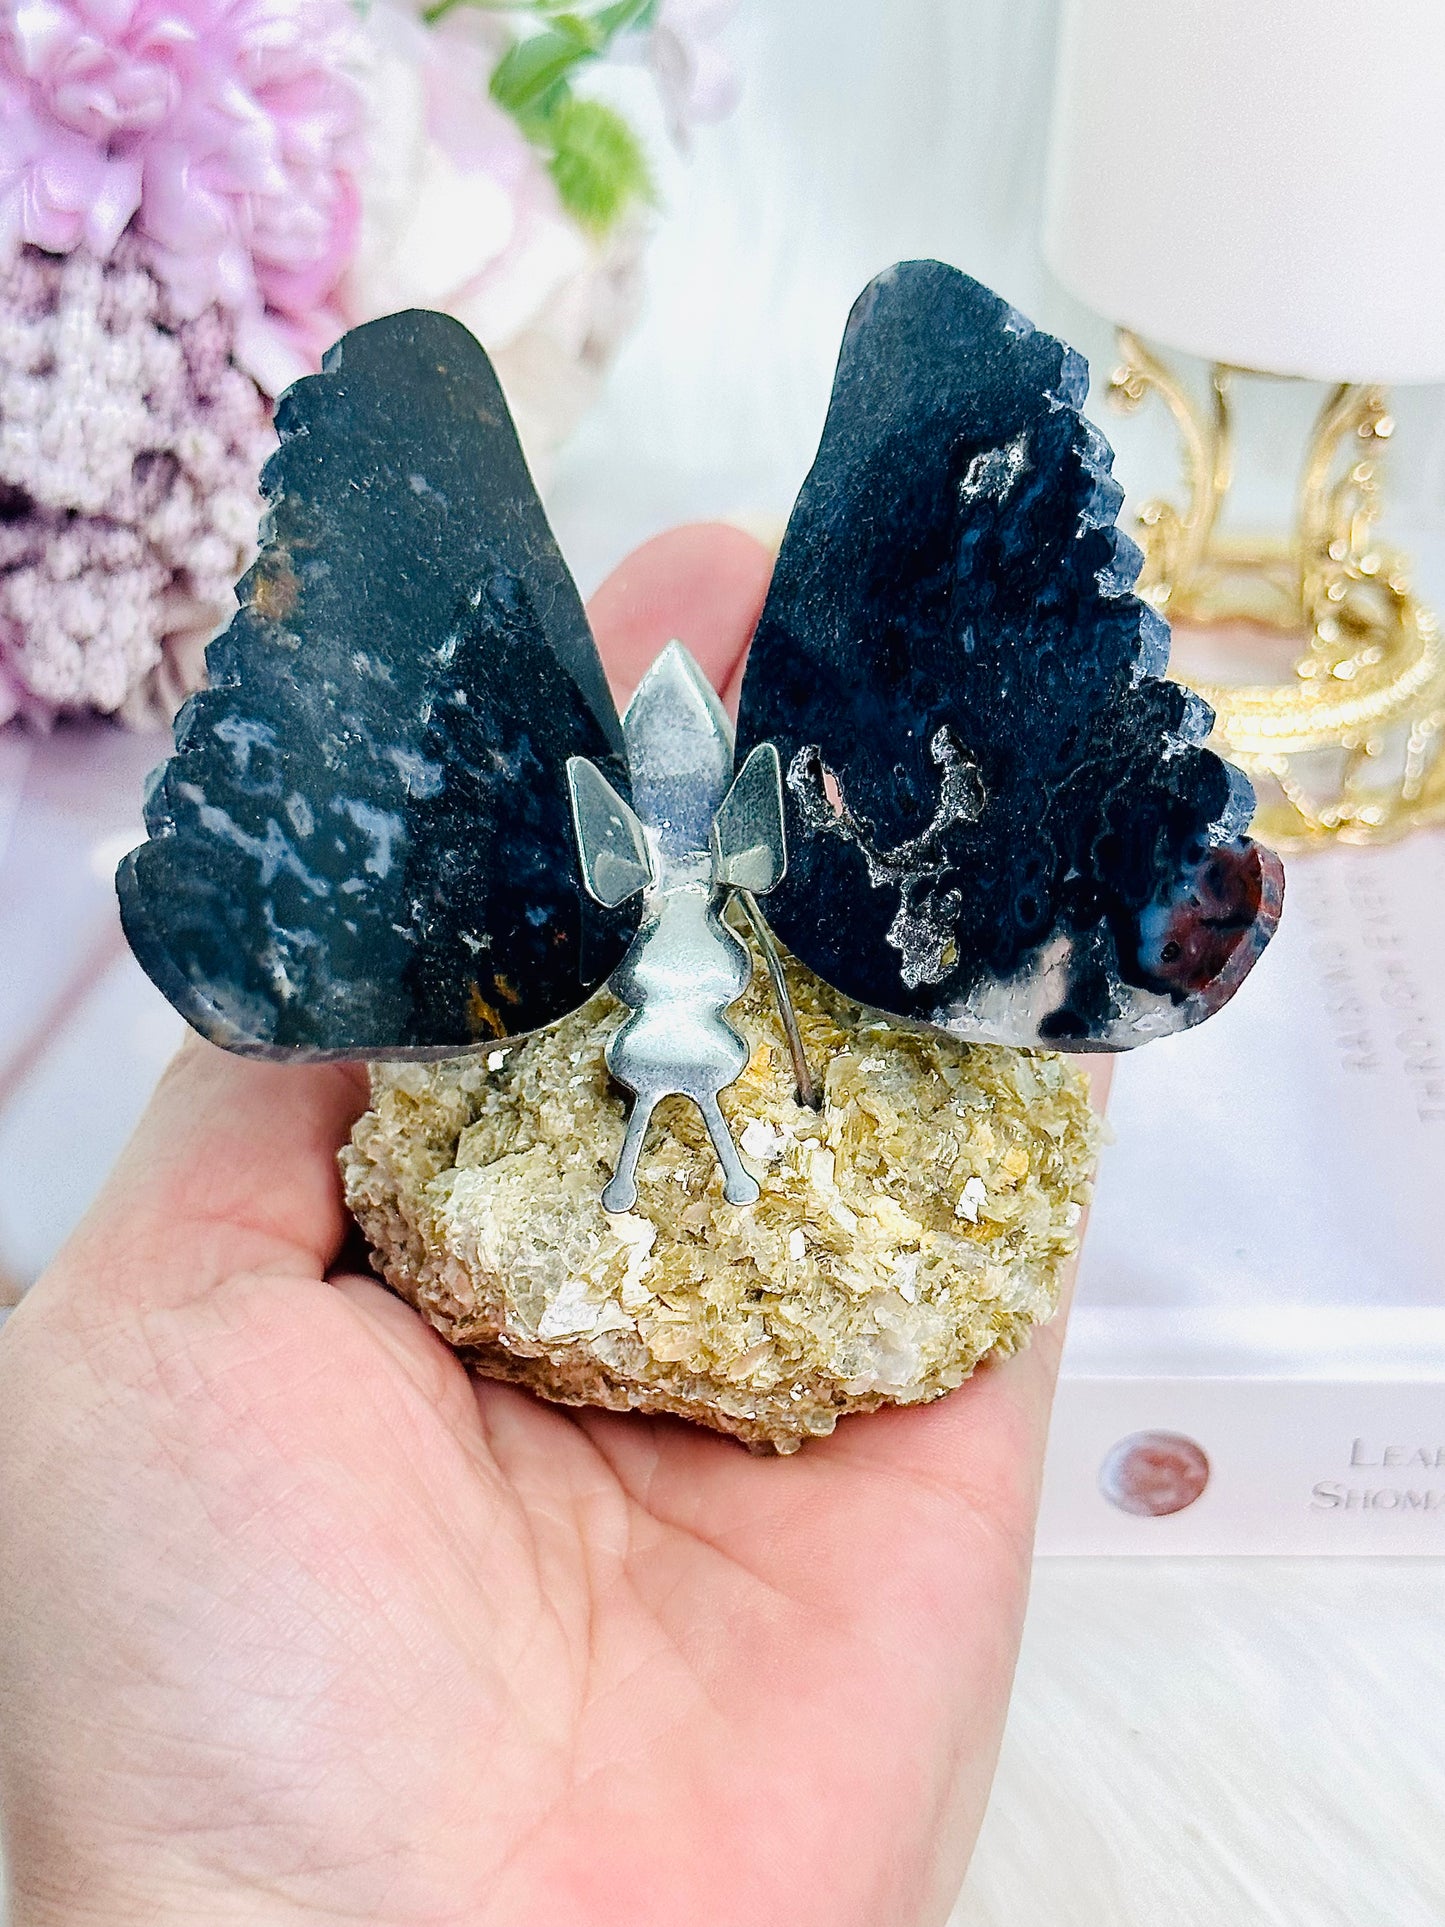 Stunning Druzy Agate Butterfly on Gold Mica Specimen